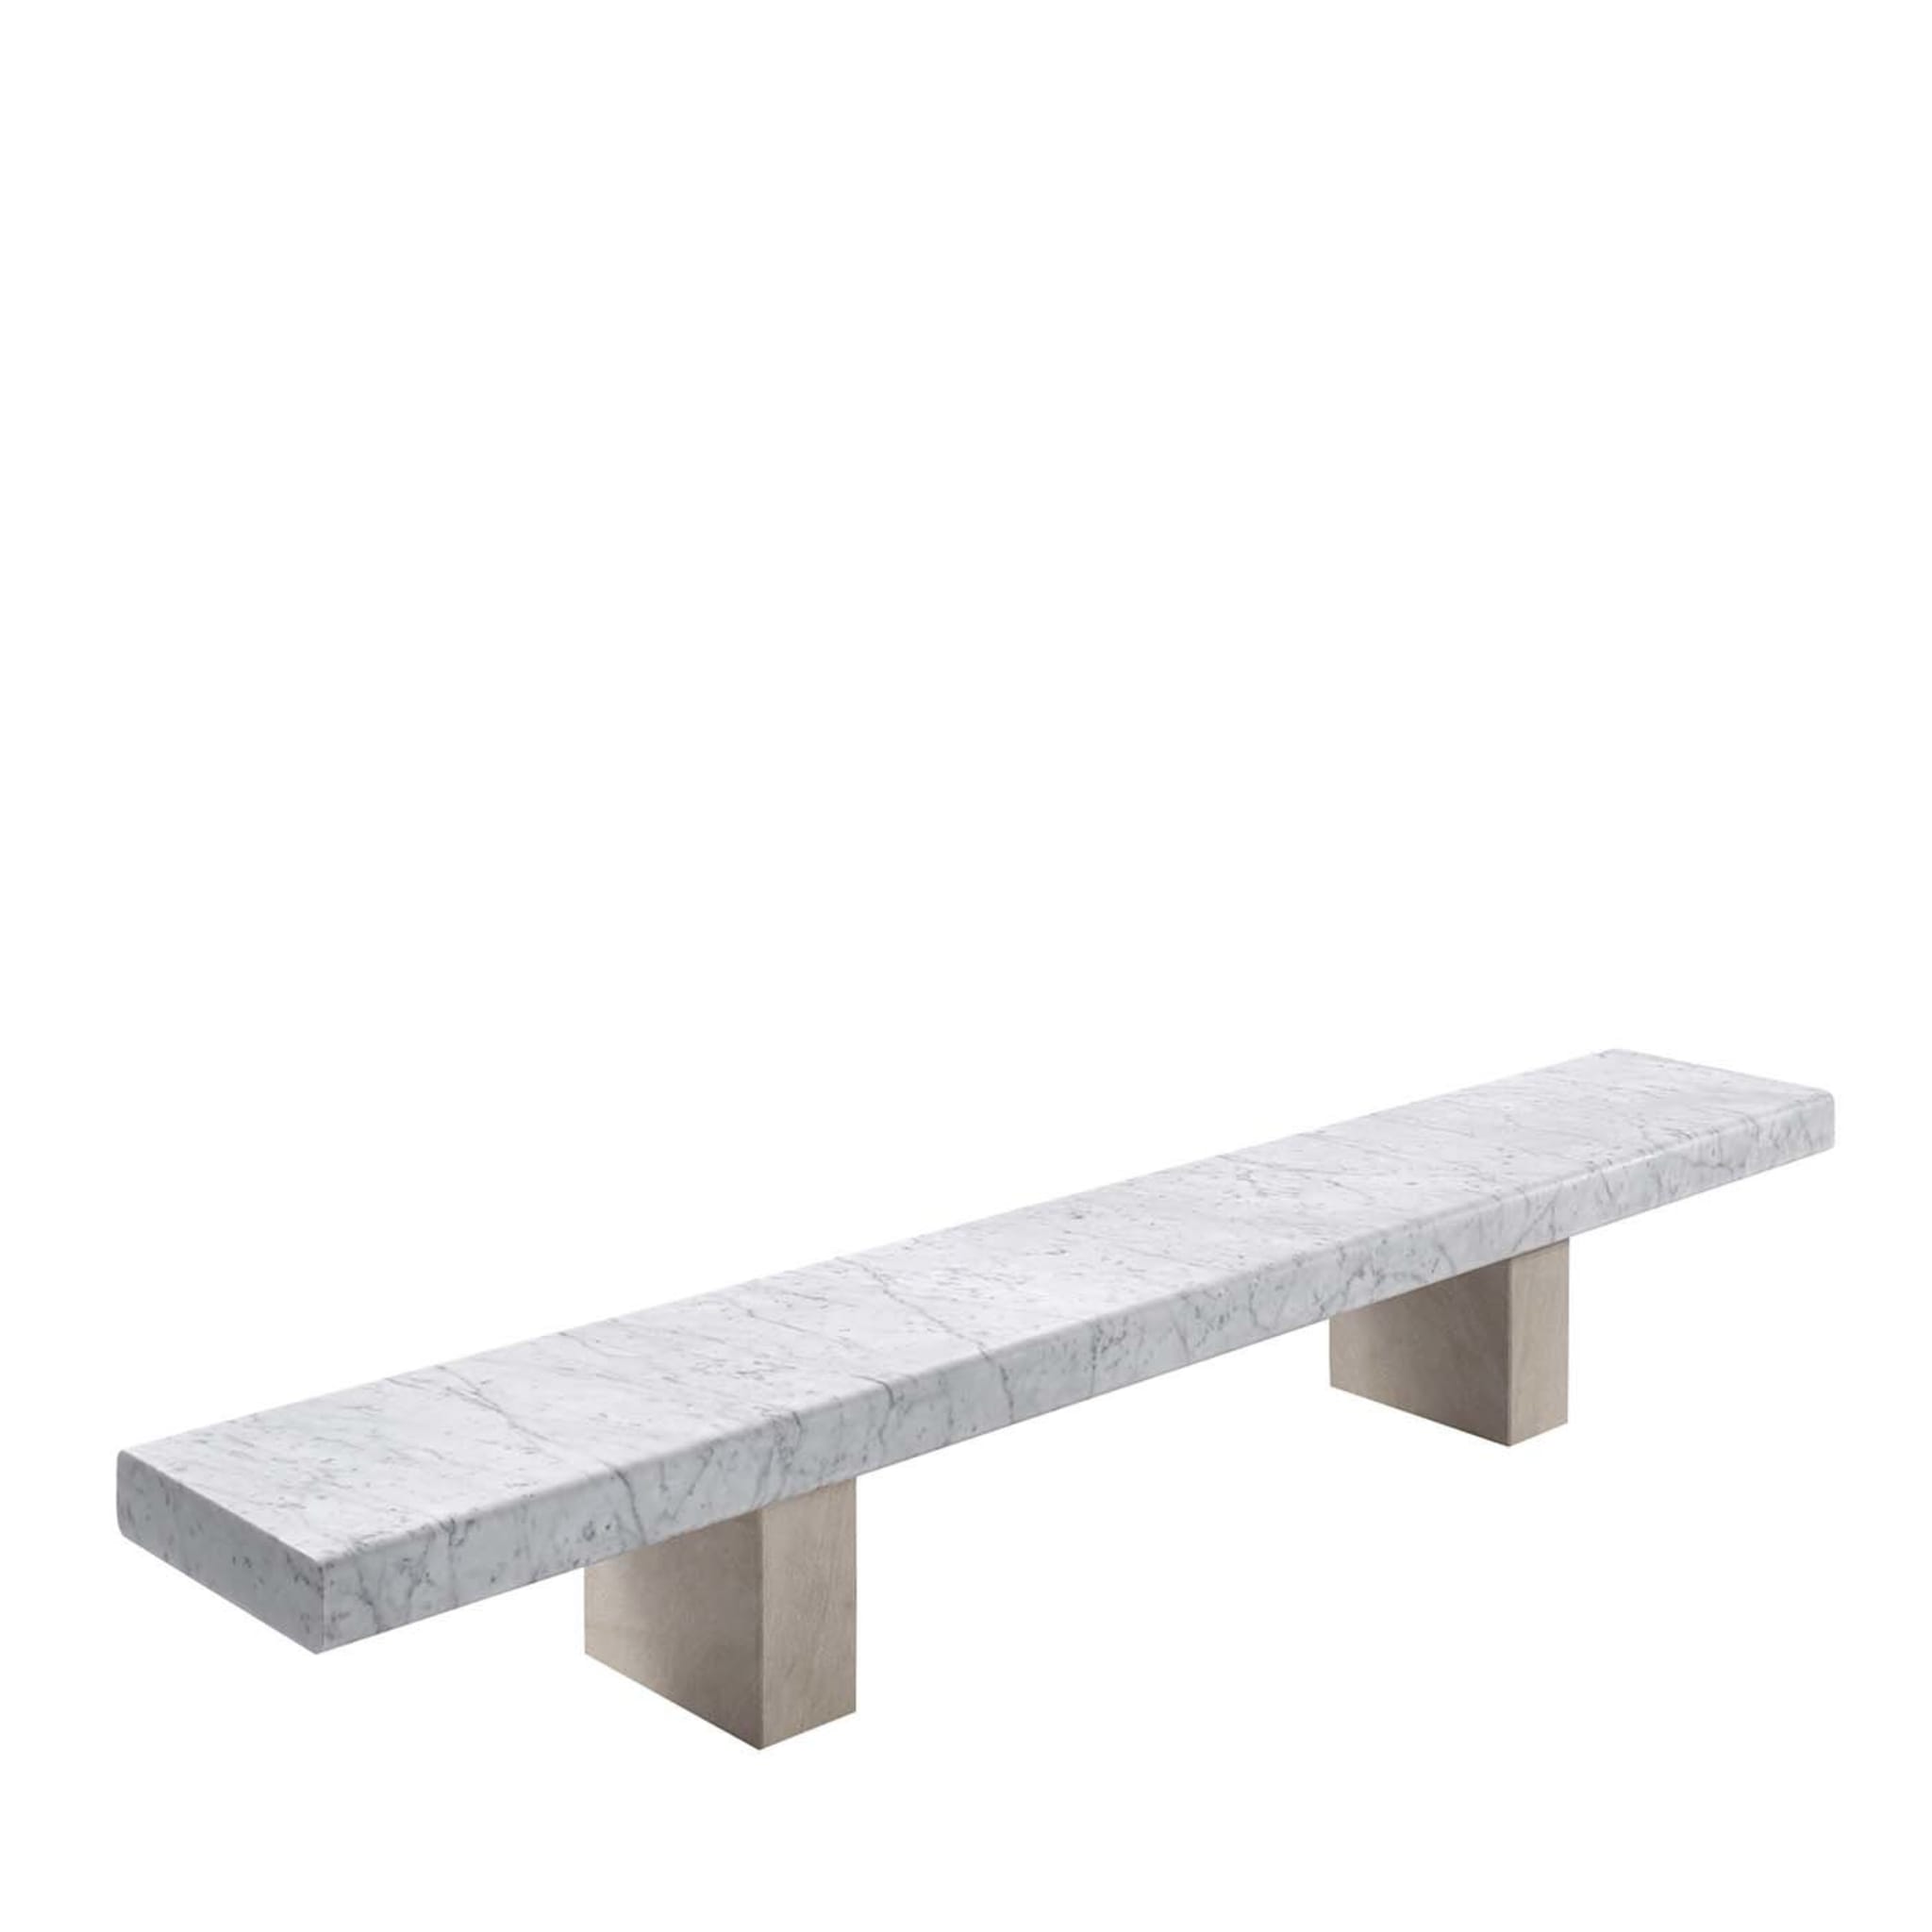 Span Outdoor Bench by John Pawson - Alternative view 1